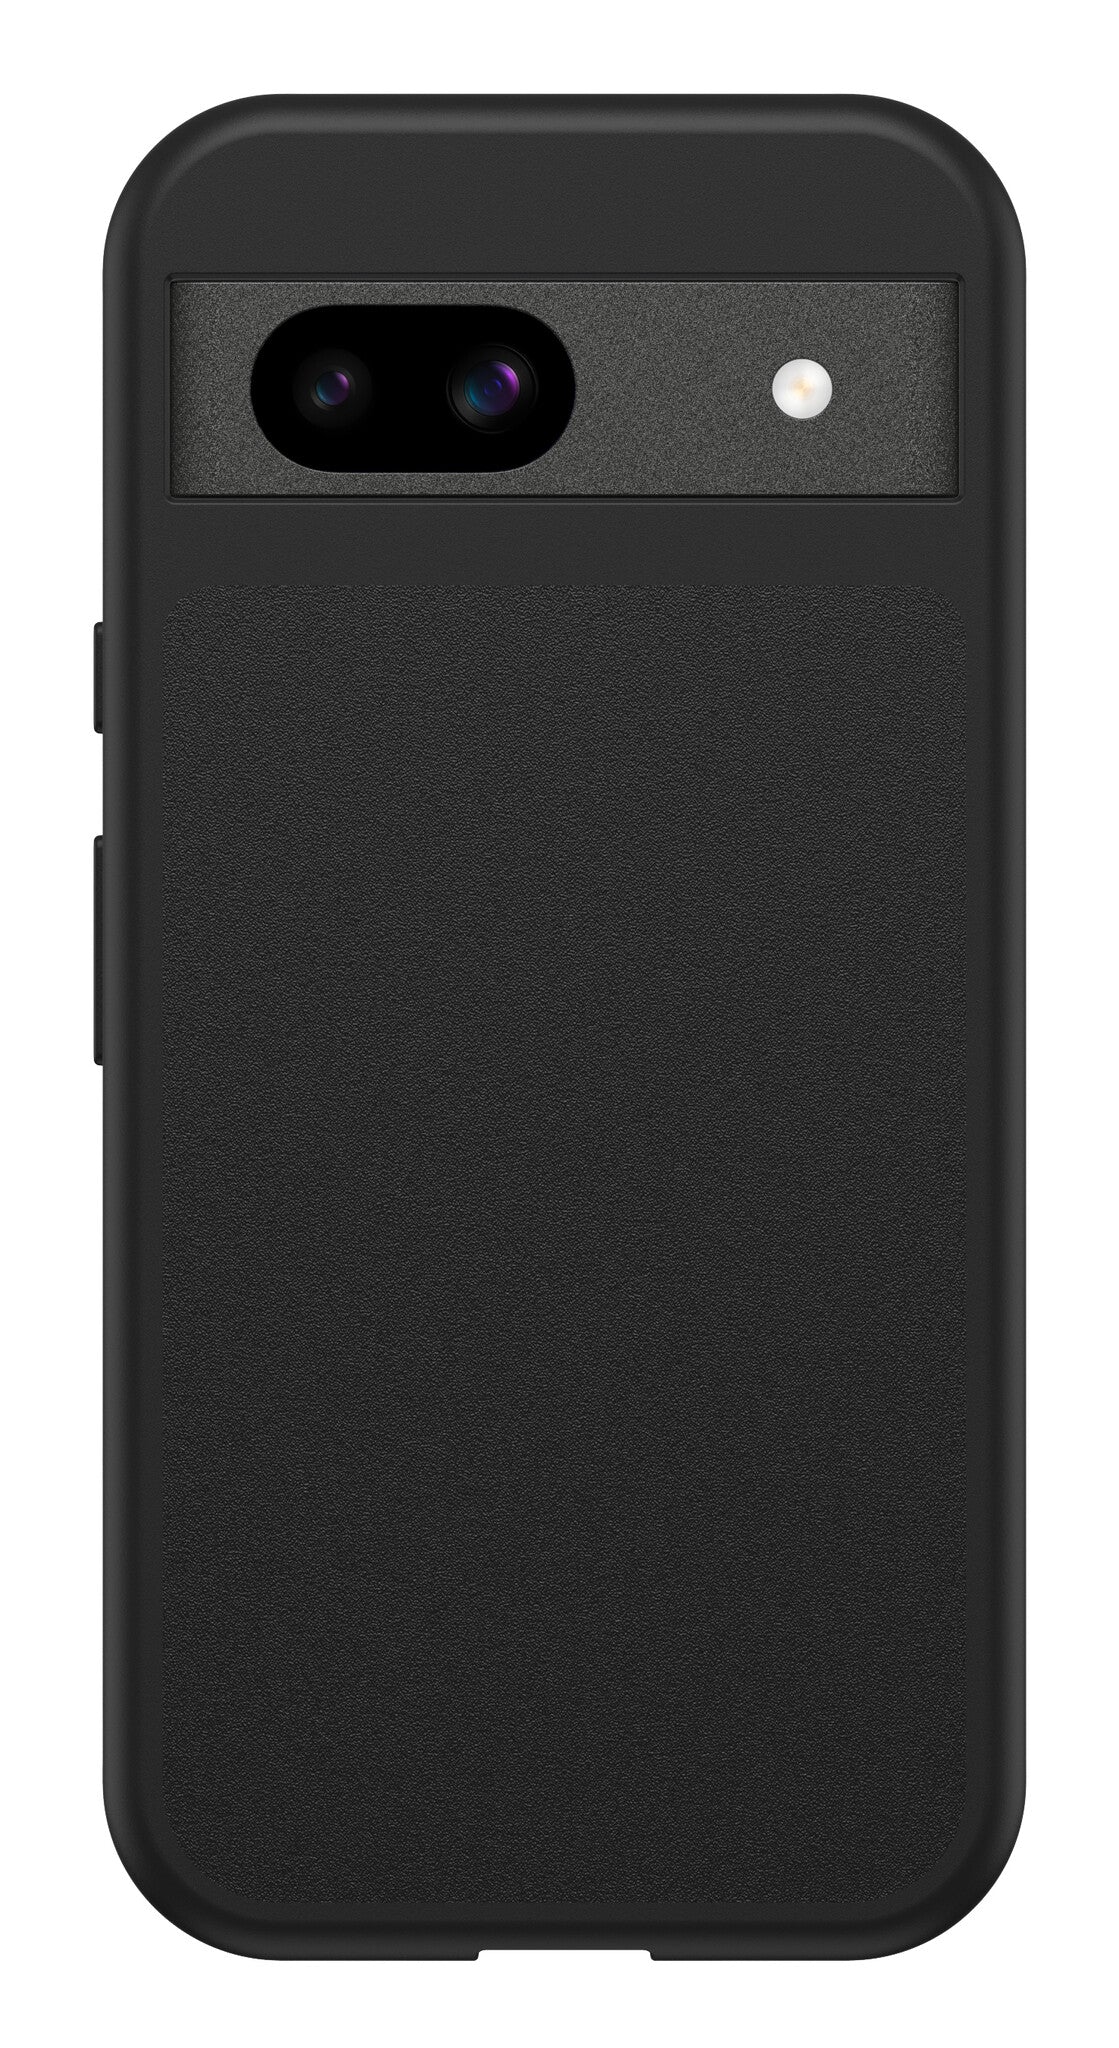 OtterBox React Series for Google Pixel 8a in Black